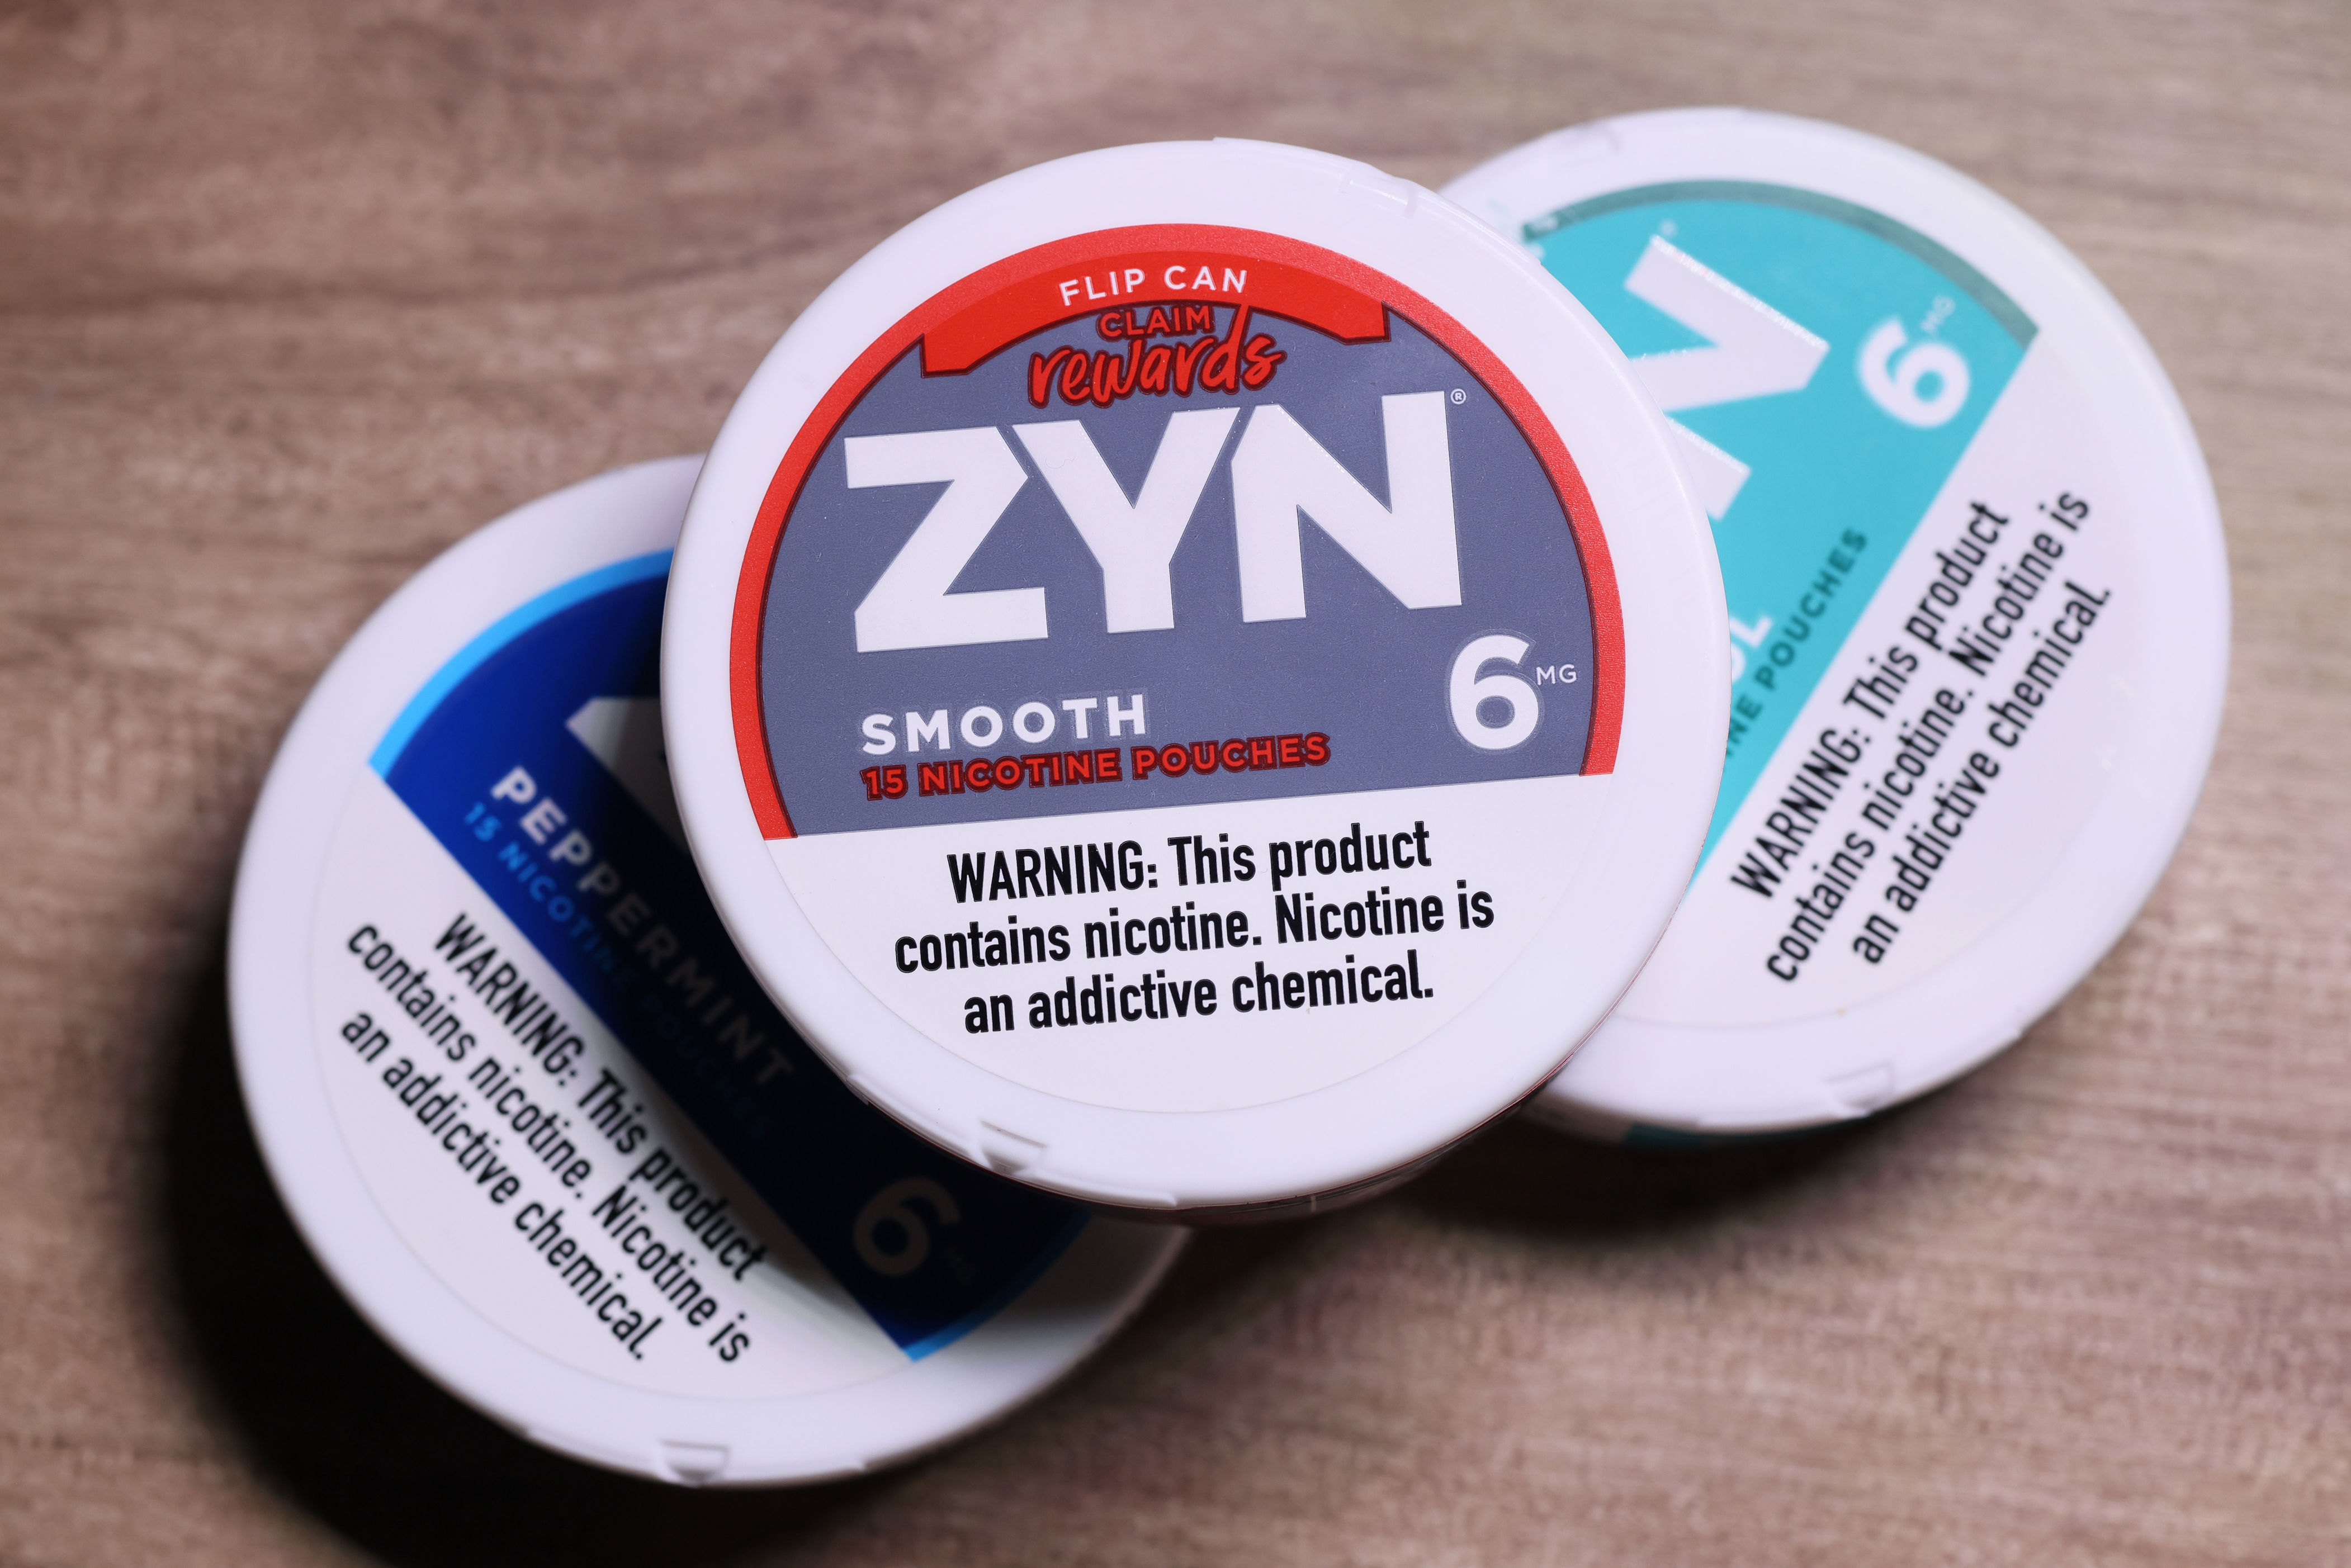 zyn nicotine pouches are gaining in popularity. but are they actually a healthier alternative to cigarettes?